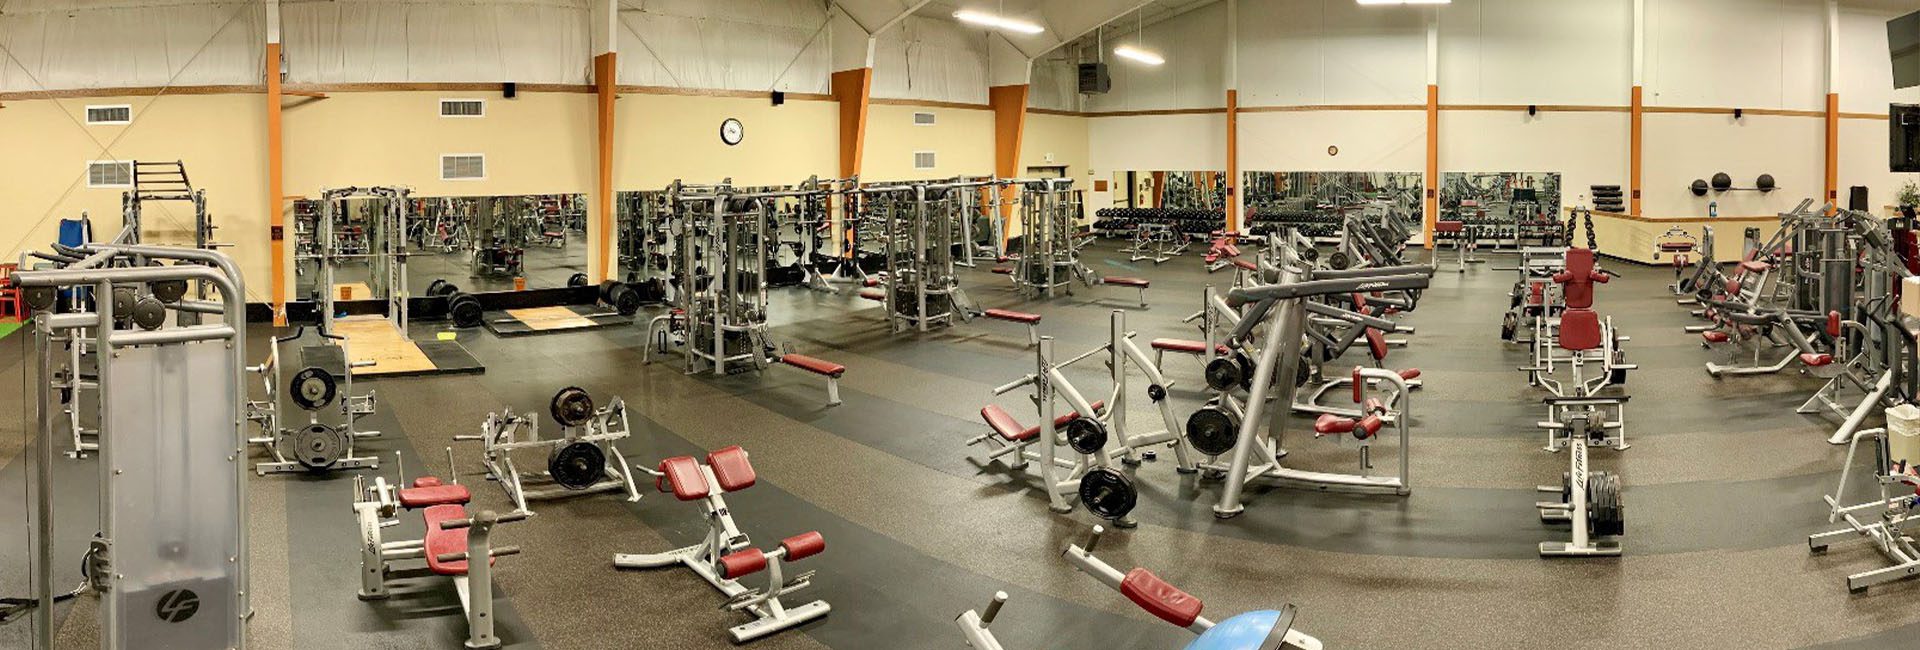 spacious weight room area